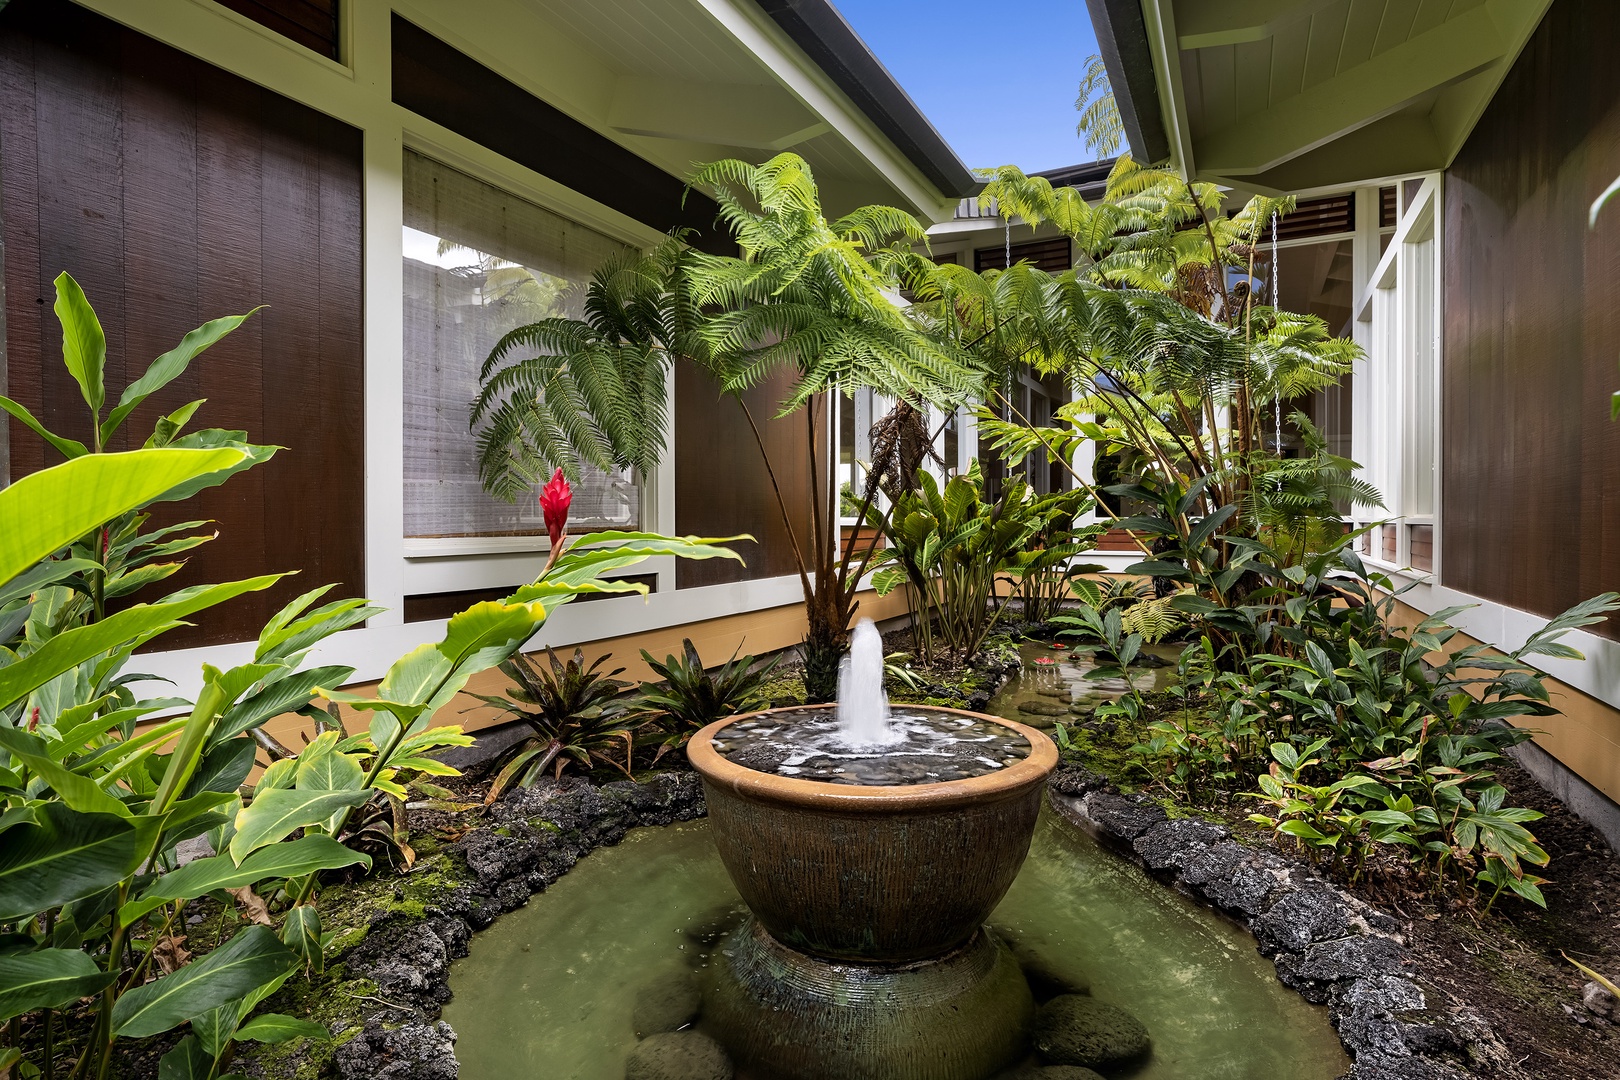 Kailua Kona Vacation Rentals, Pineapple House - Water Feature with tropical plants and flowers